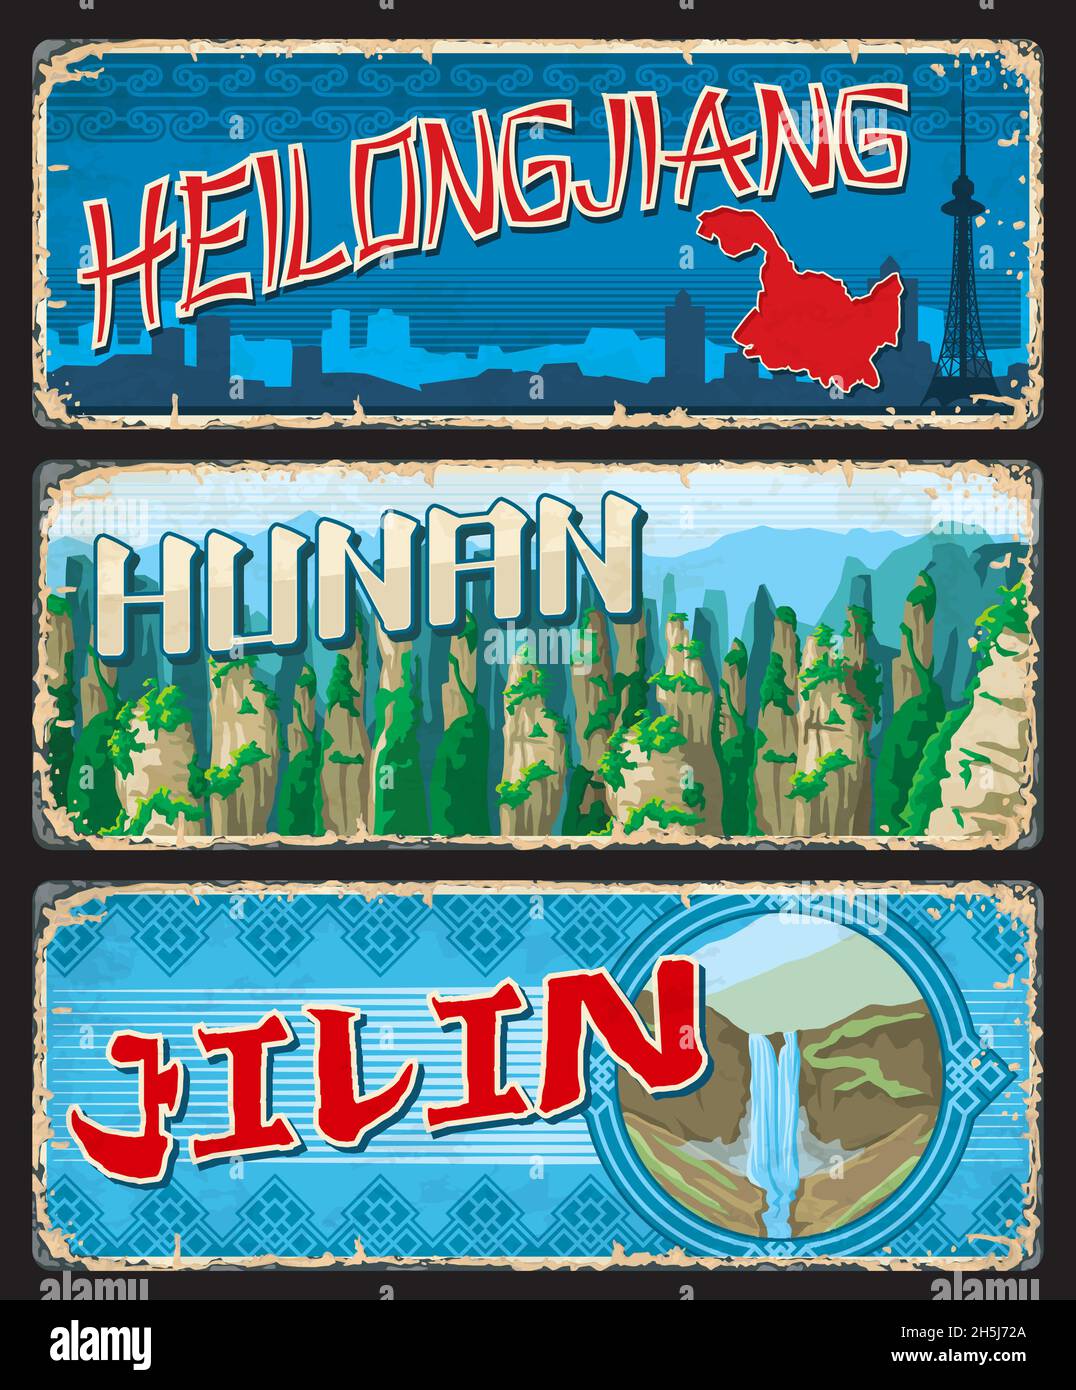 Heilongjiang, Hunan, Jilin Chinese province plates and travel stickers, vector. Chinese tin signs or luggage tags with province map, taglines and sigh Stock Vector